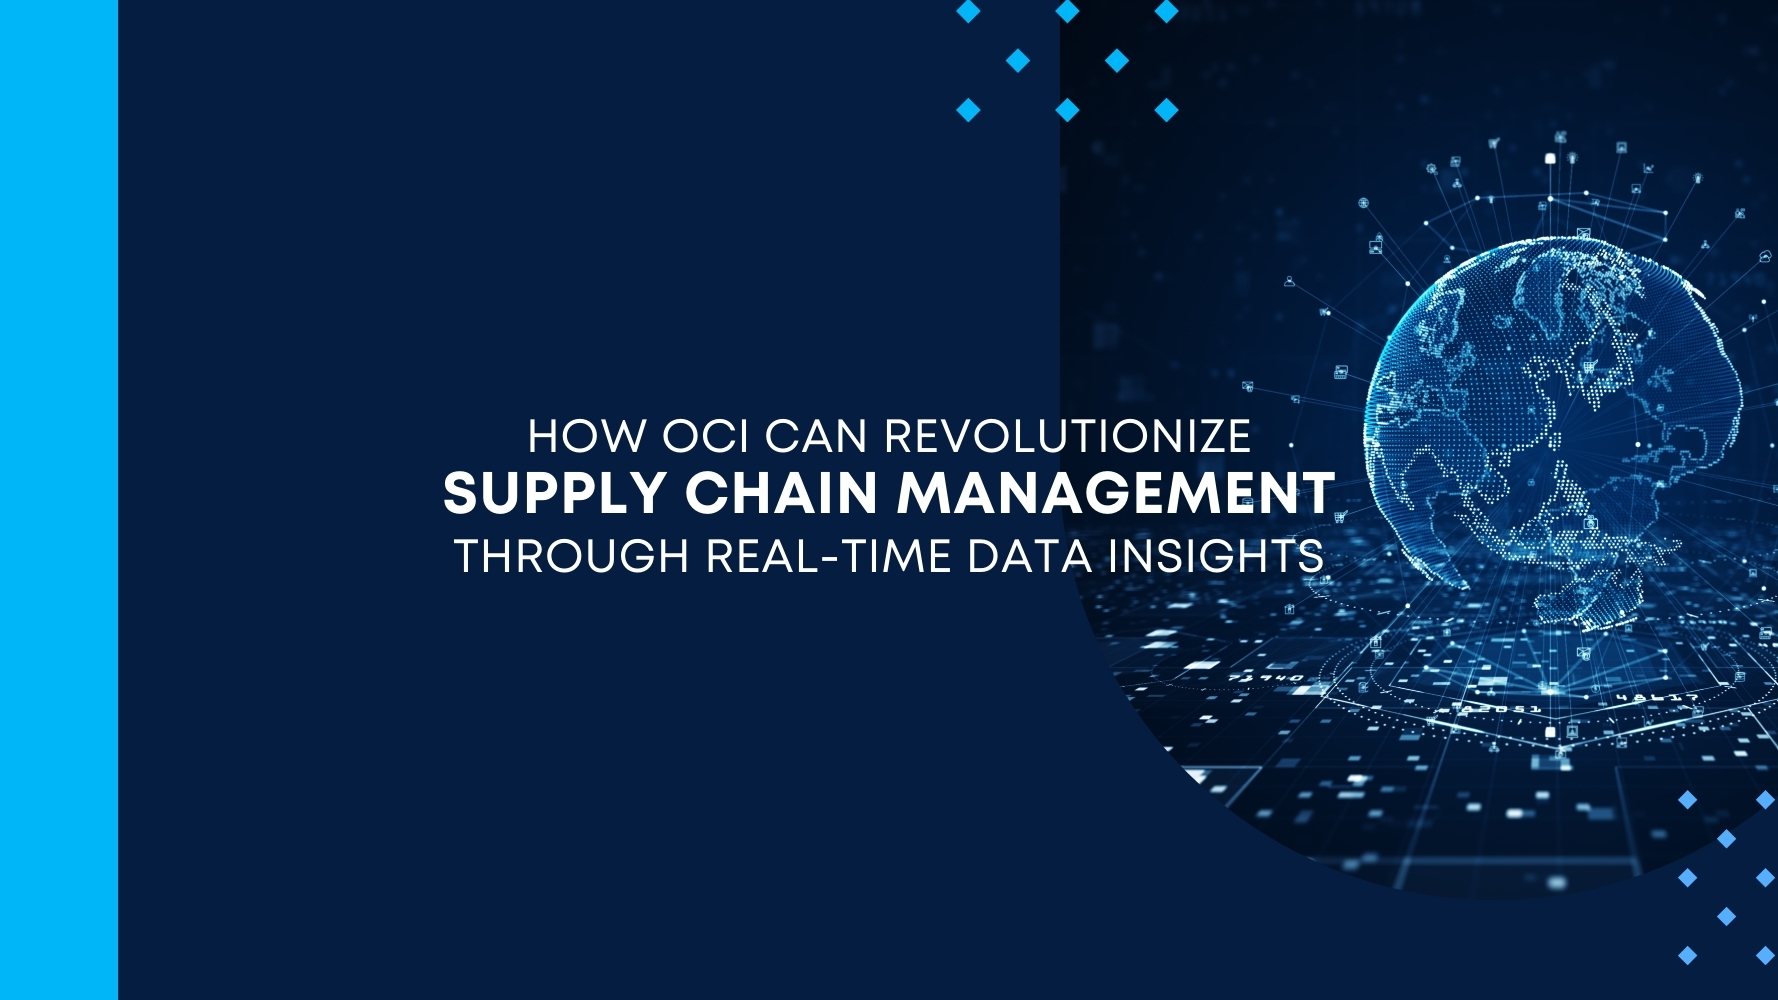 How OCI Can Revolutionize Supply Chain Management Through Real-Time Data Insights.